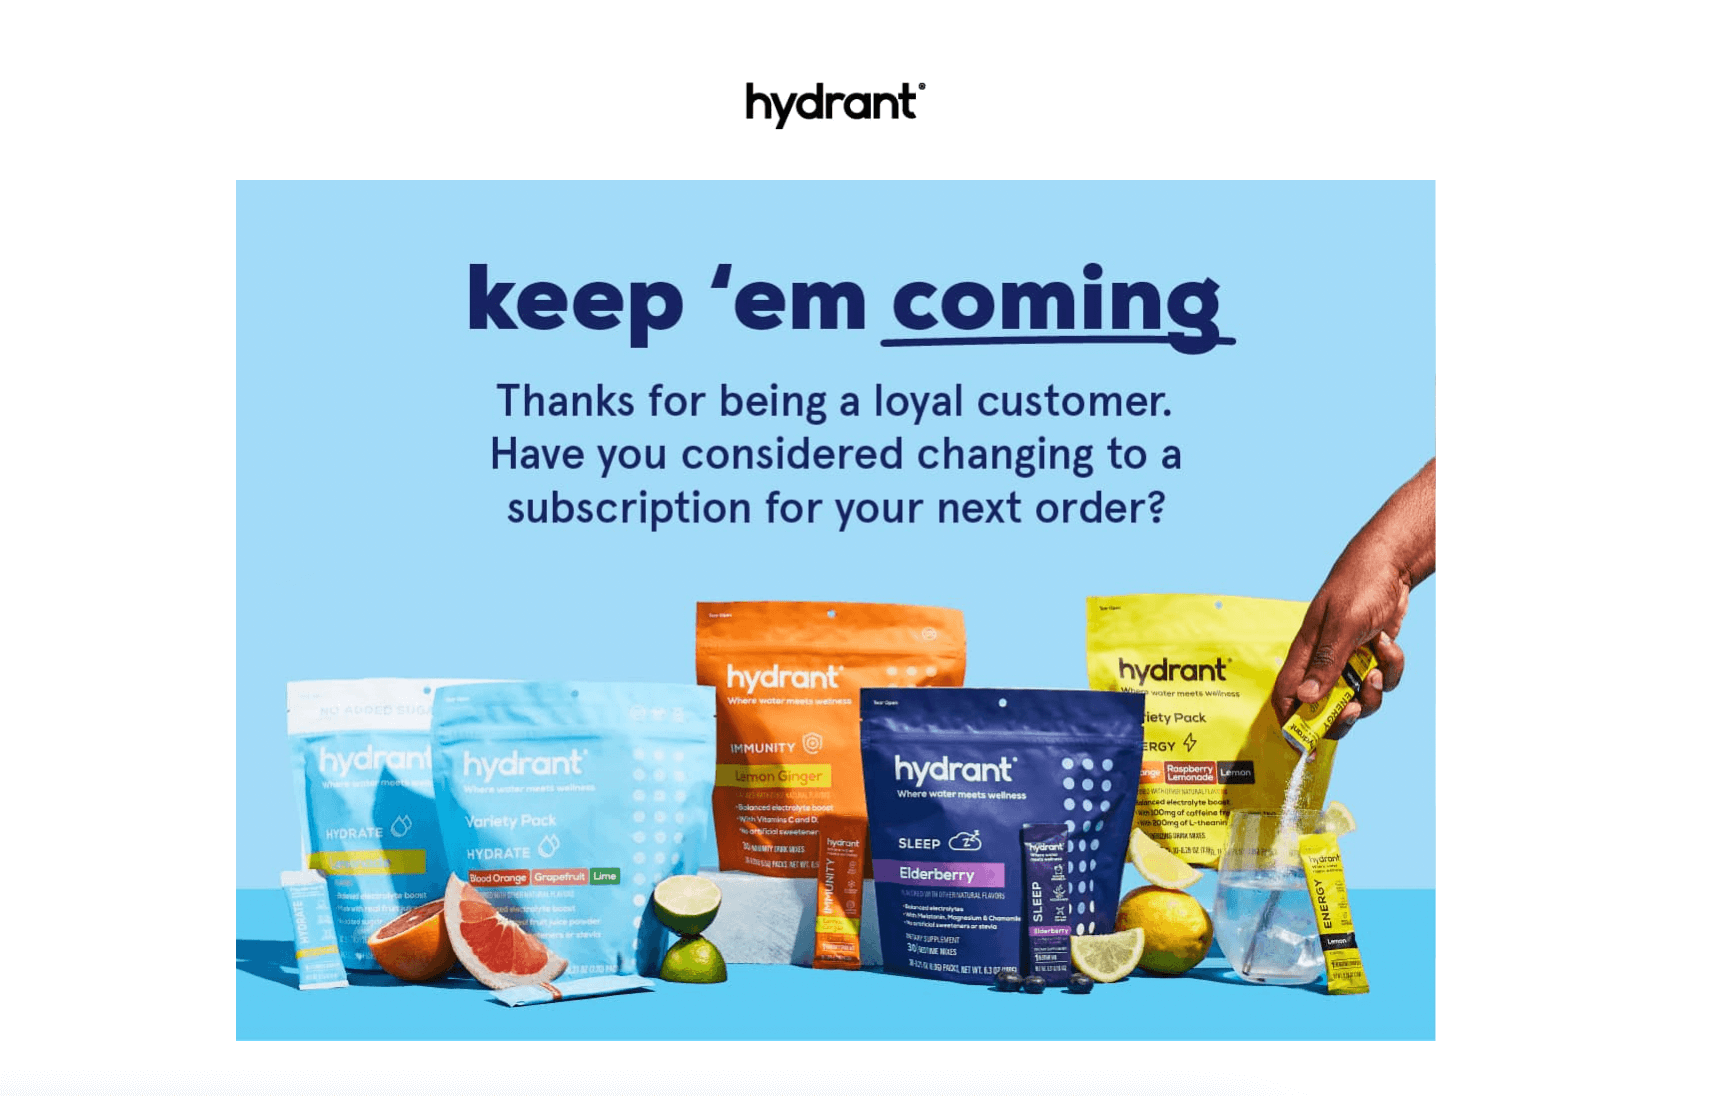 screnshot of Hydrant's email to returning customers